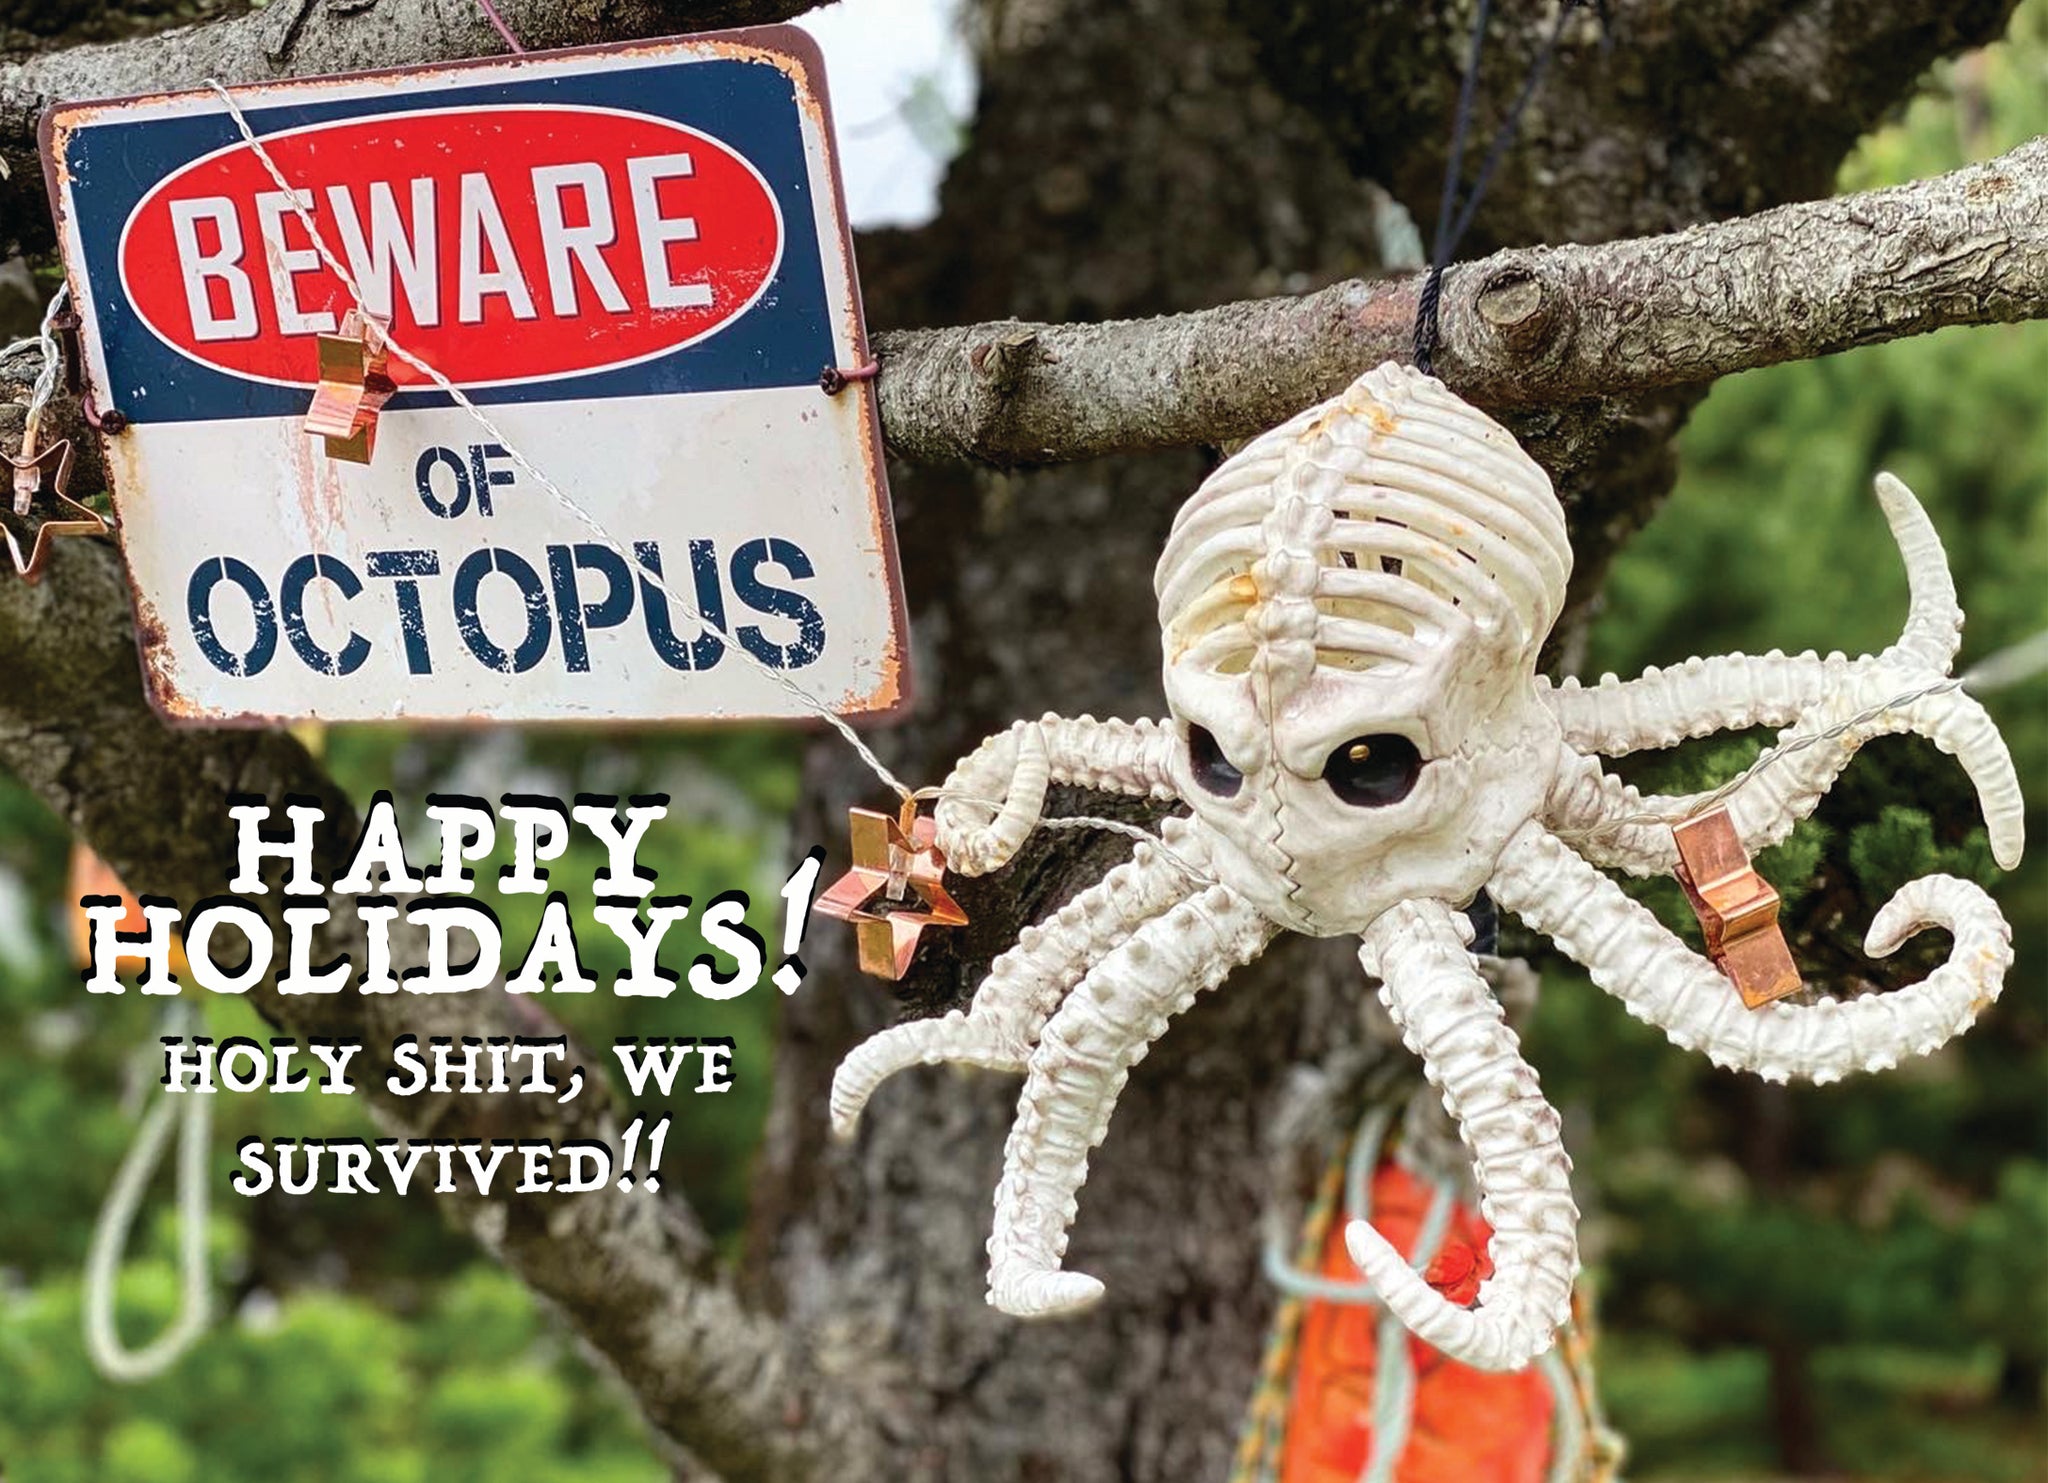 We Survived! Funny Holiday Greeting Card